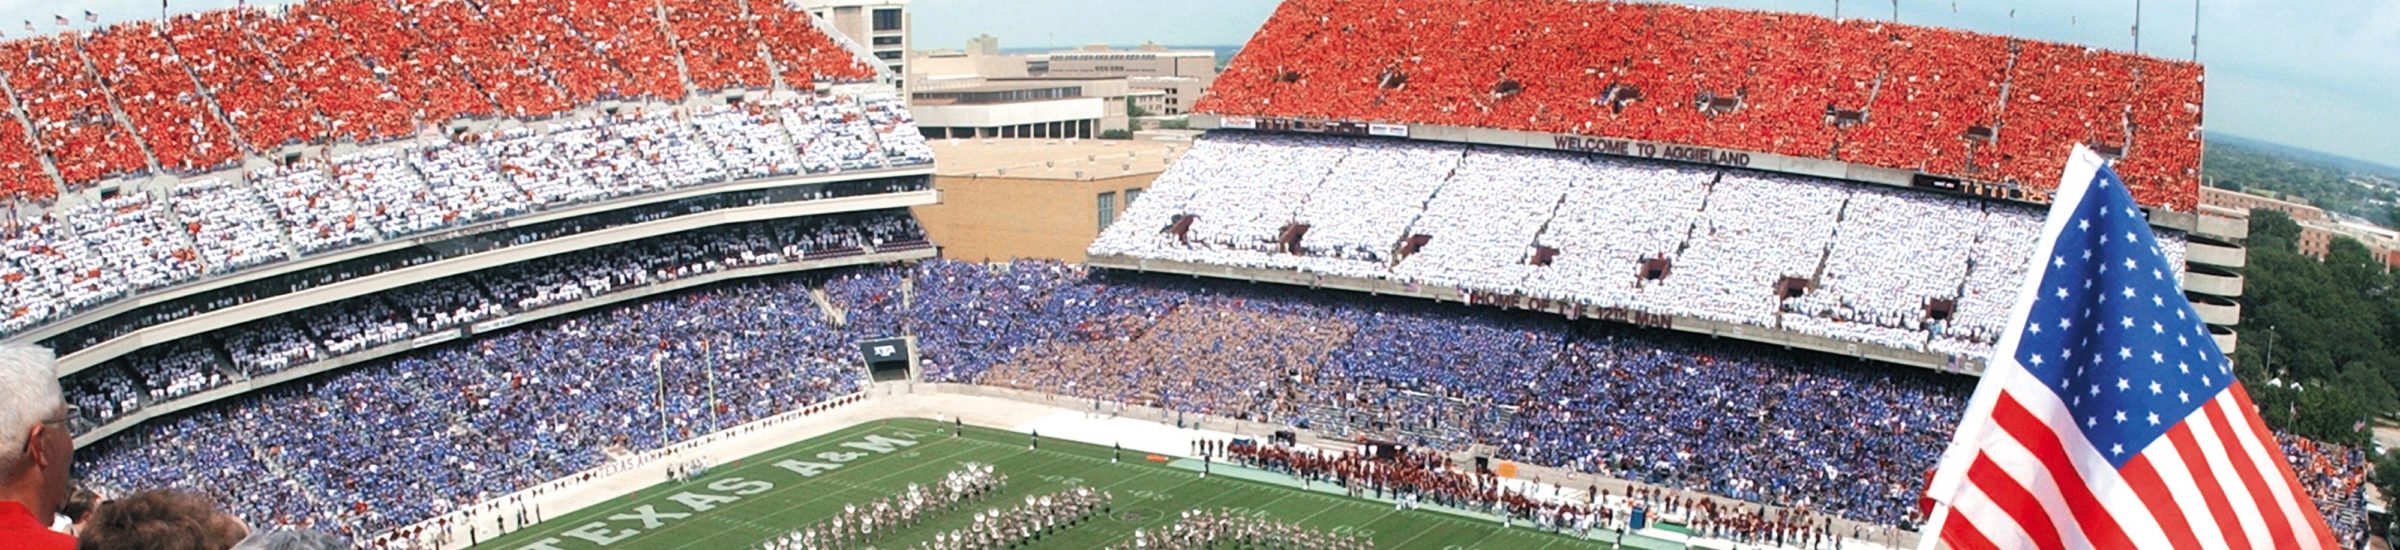 image of fans at kyle field for the original red white and blue game